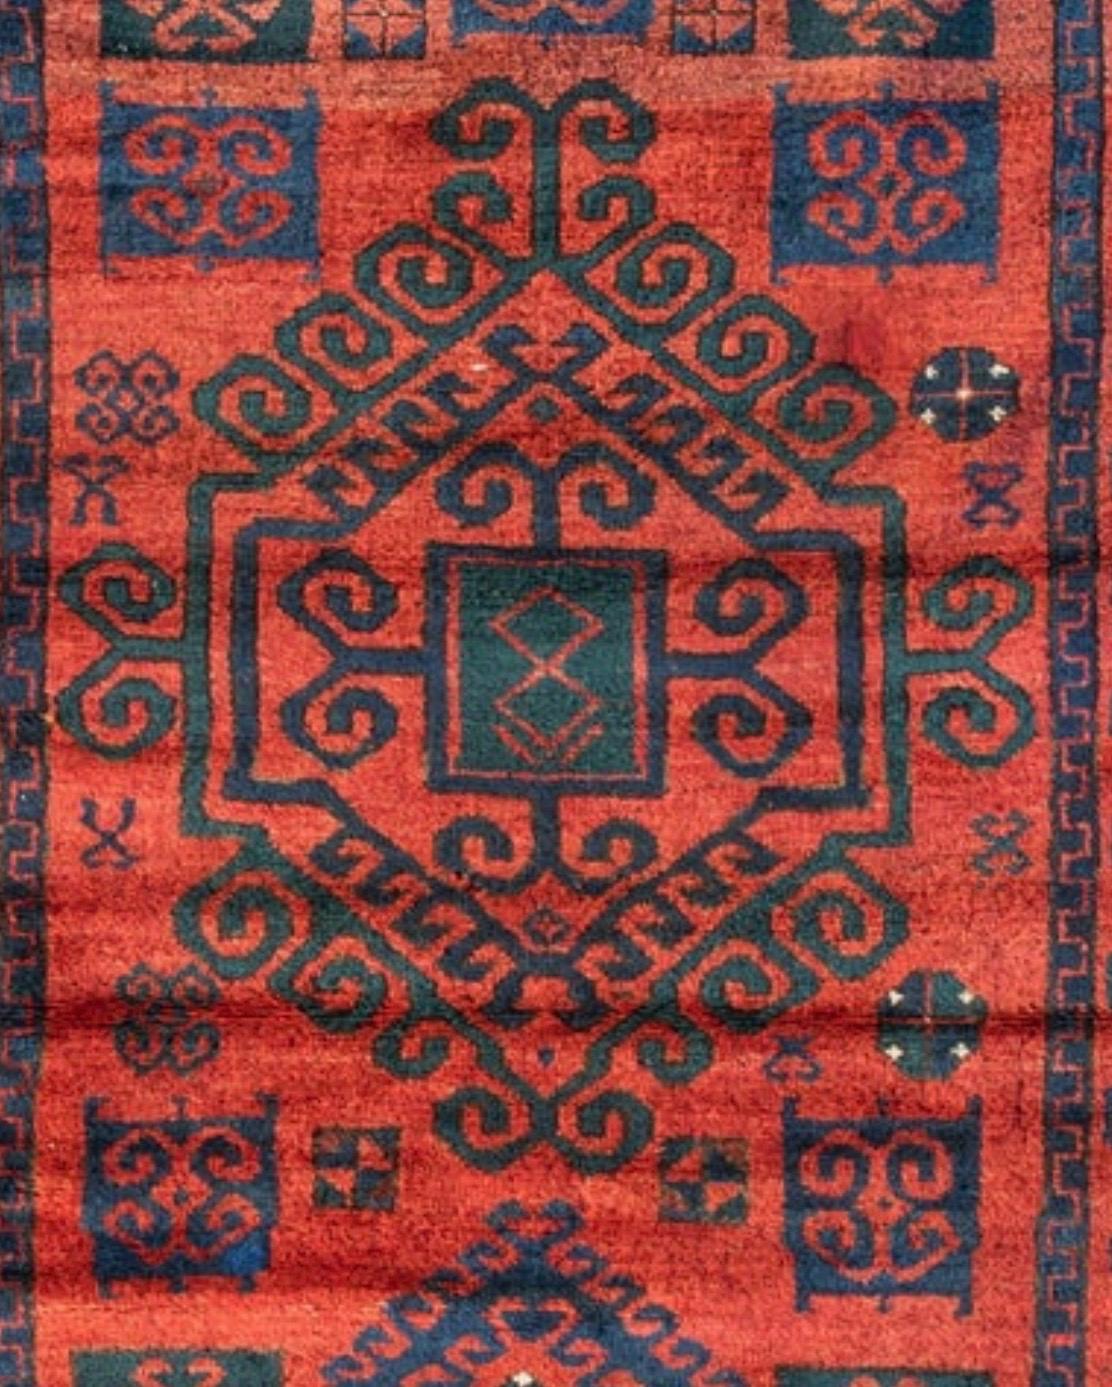 This is a lovely hand-woven antique Afcan rug from the 1930s measuring 4.4 x 6.7 ft.